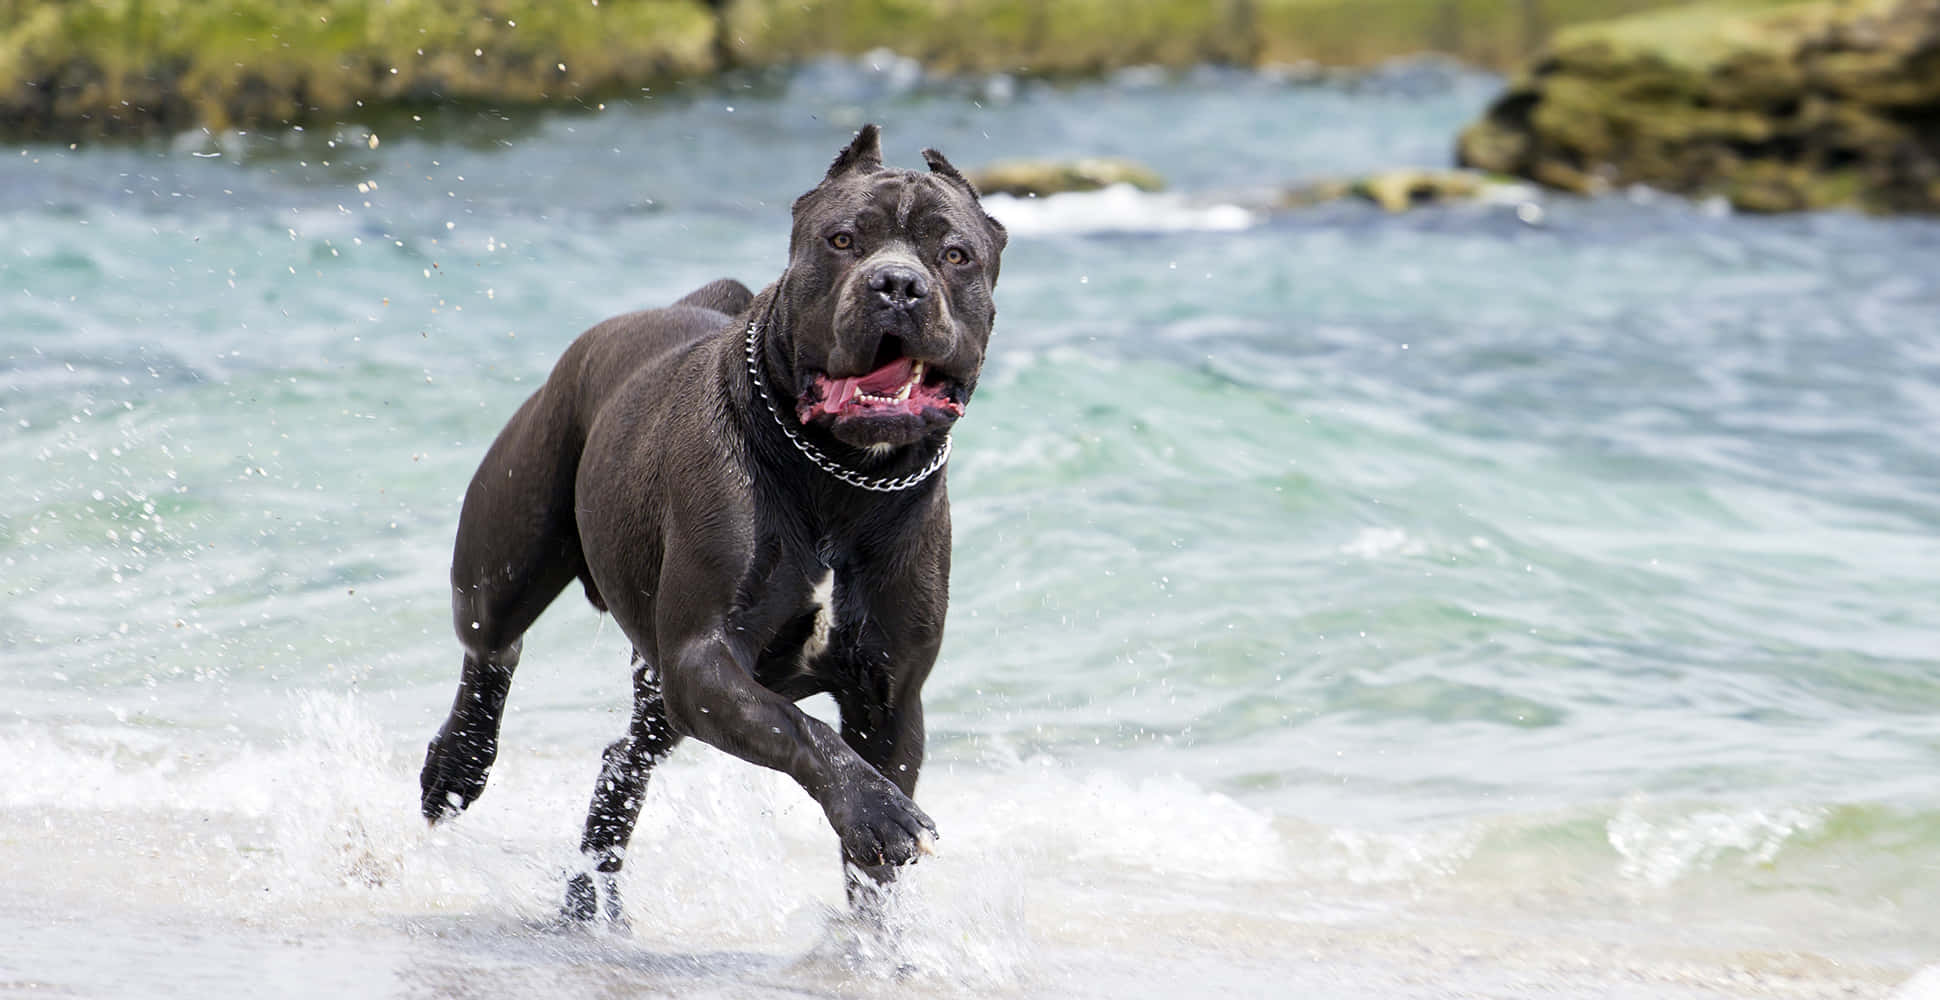 This Loyal Cane Corso is Alert and Ready To Protect